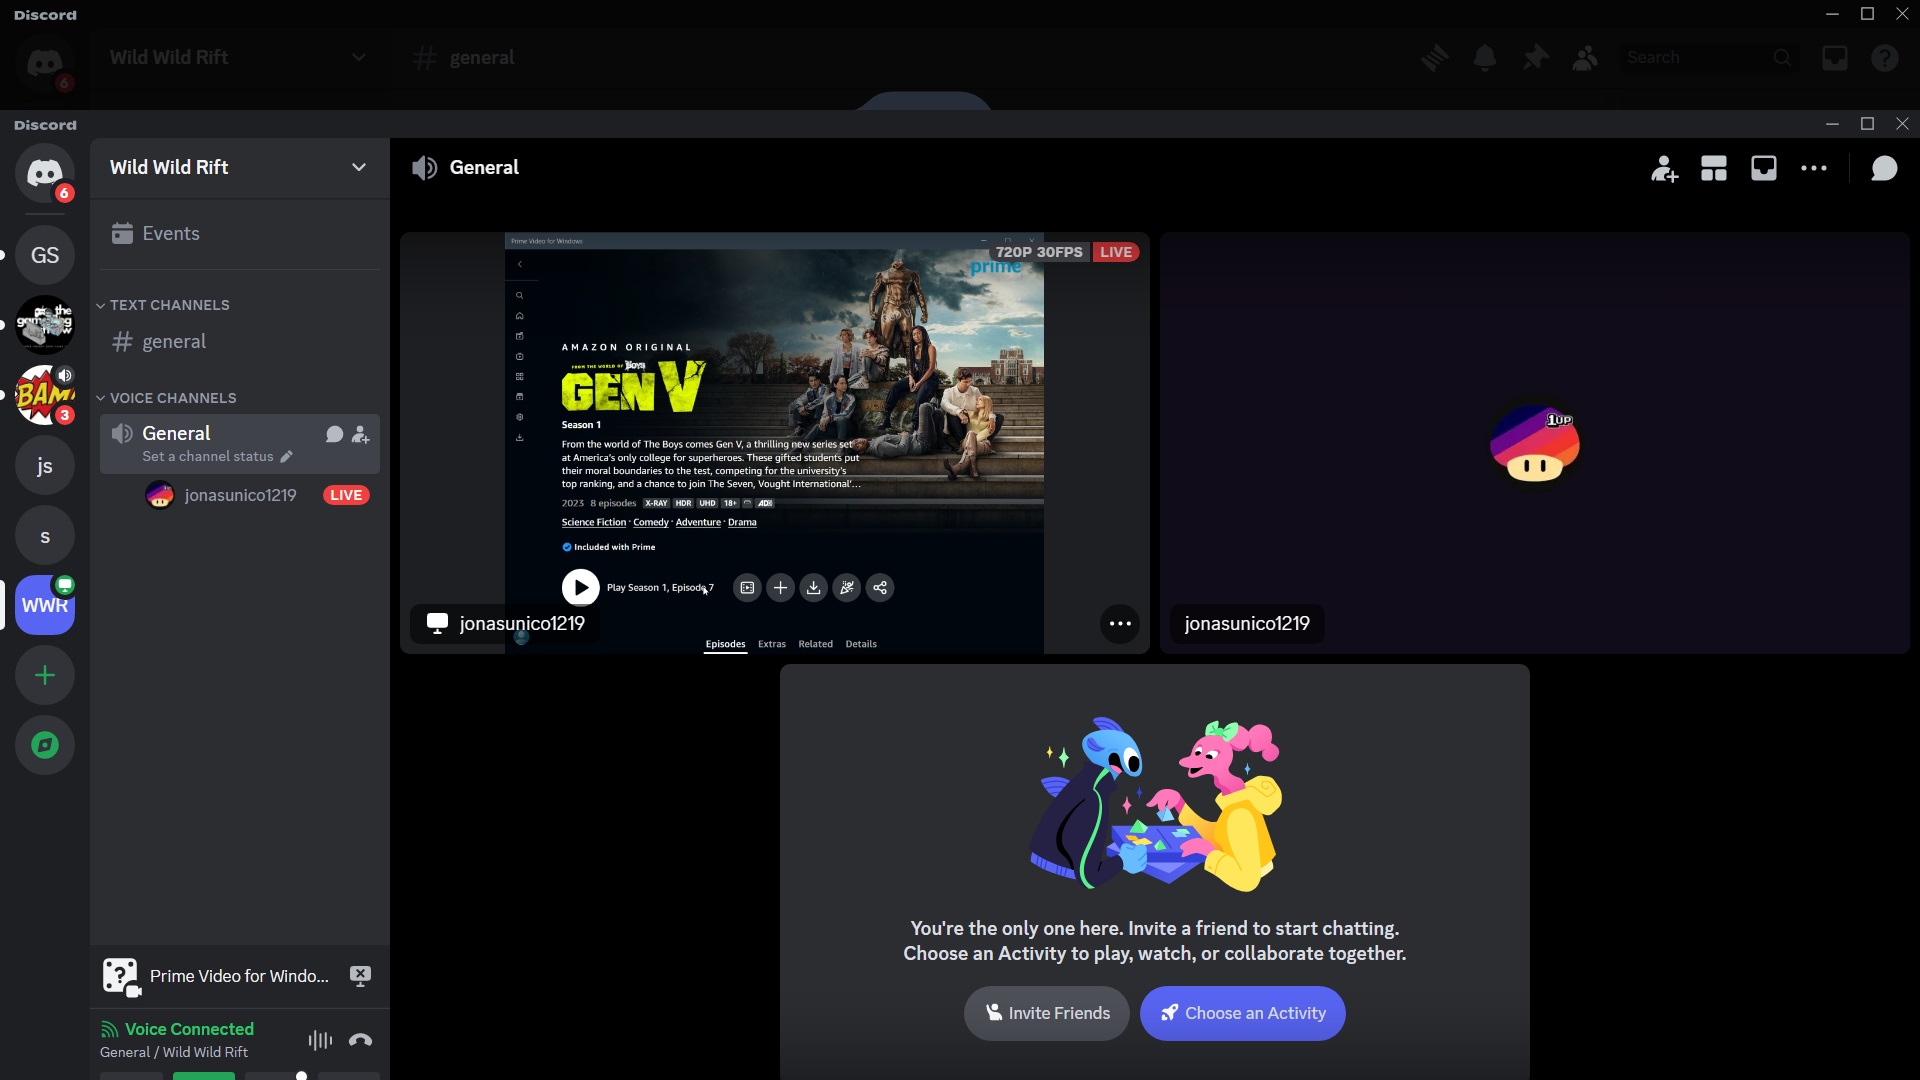 Amazon Prime successfully streaming on Discord